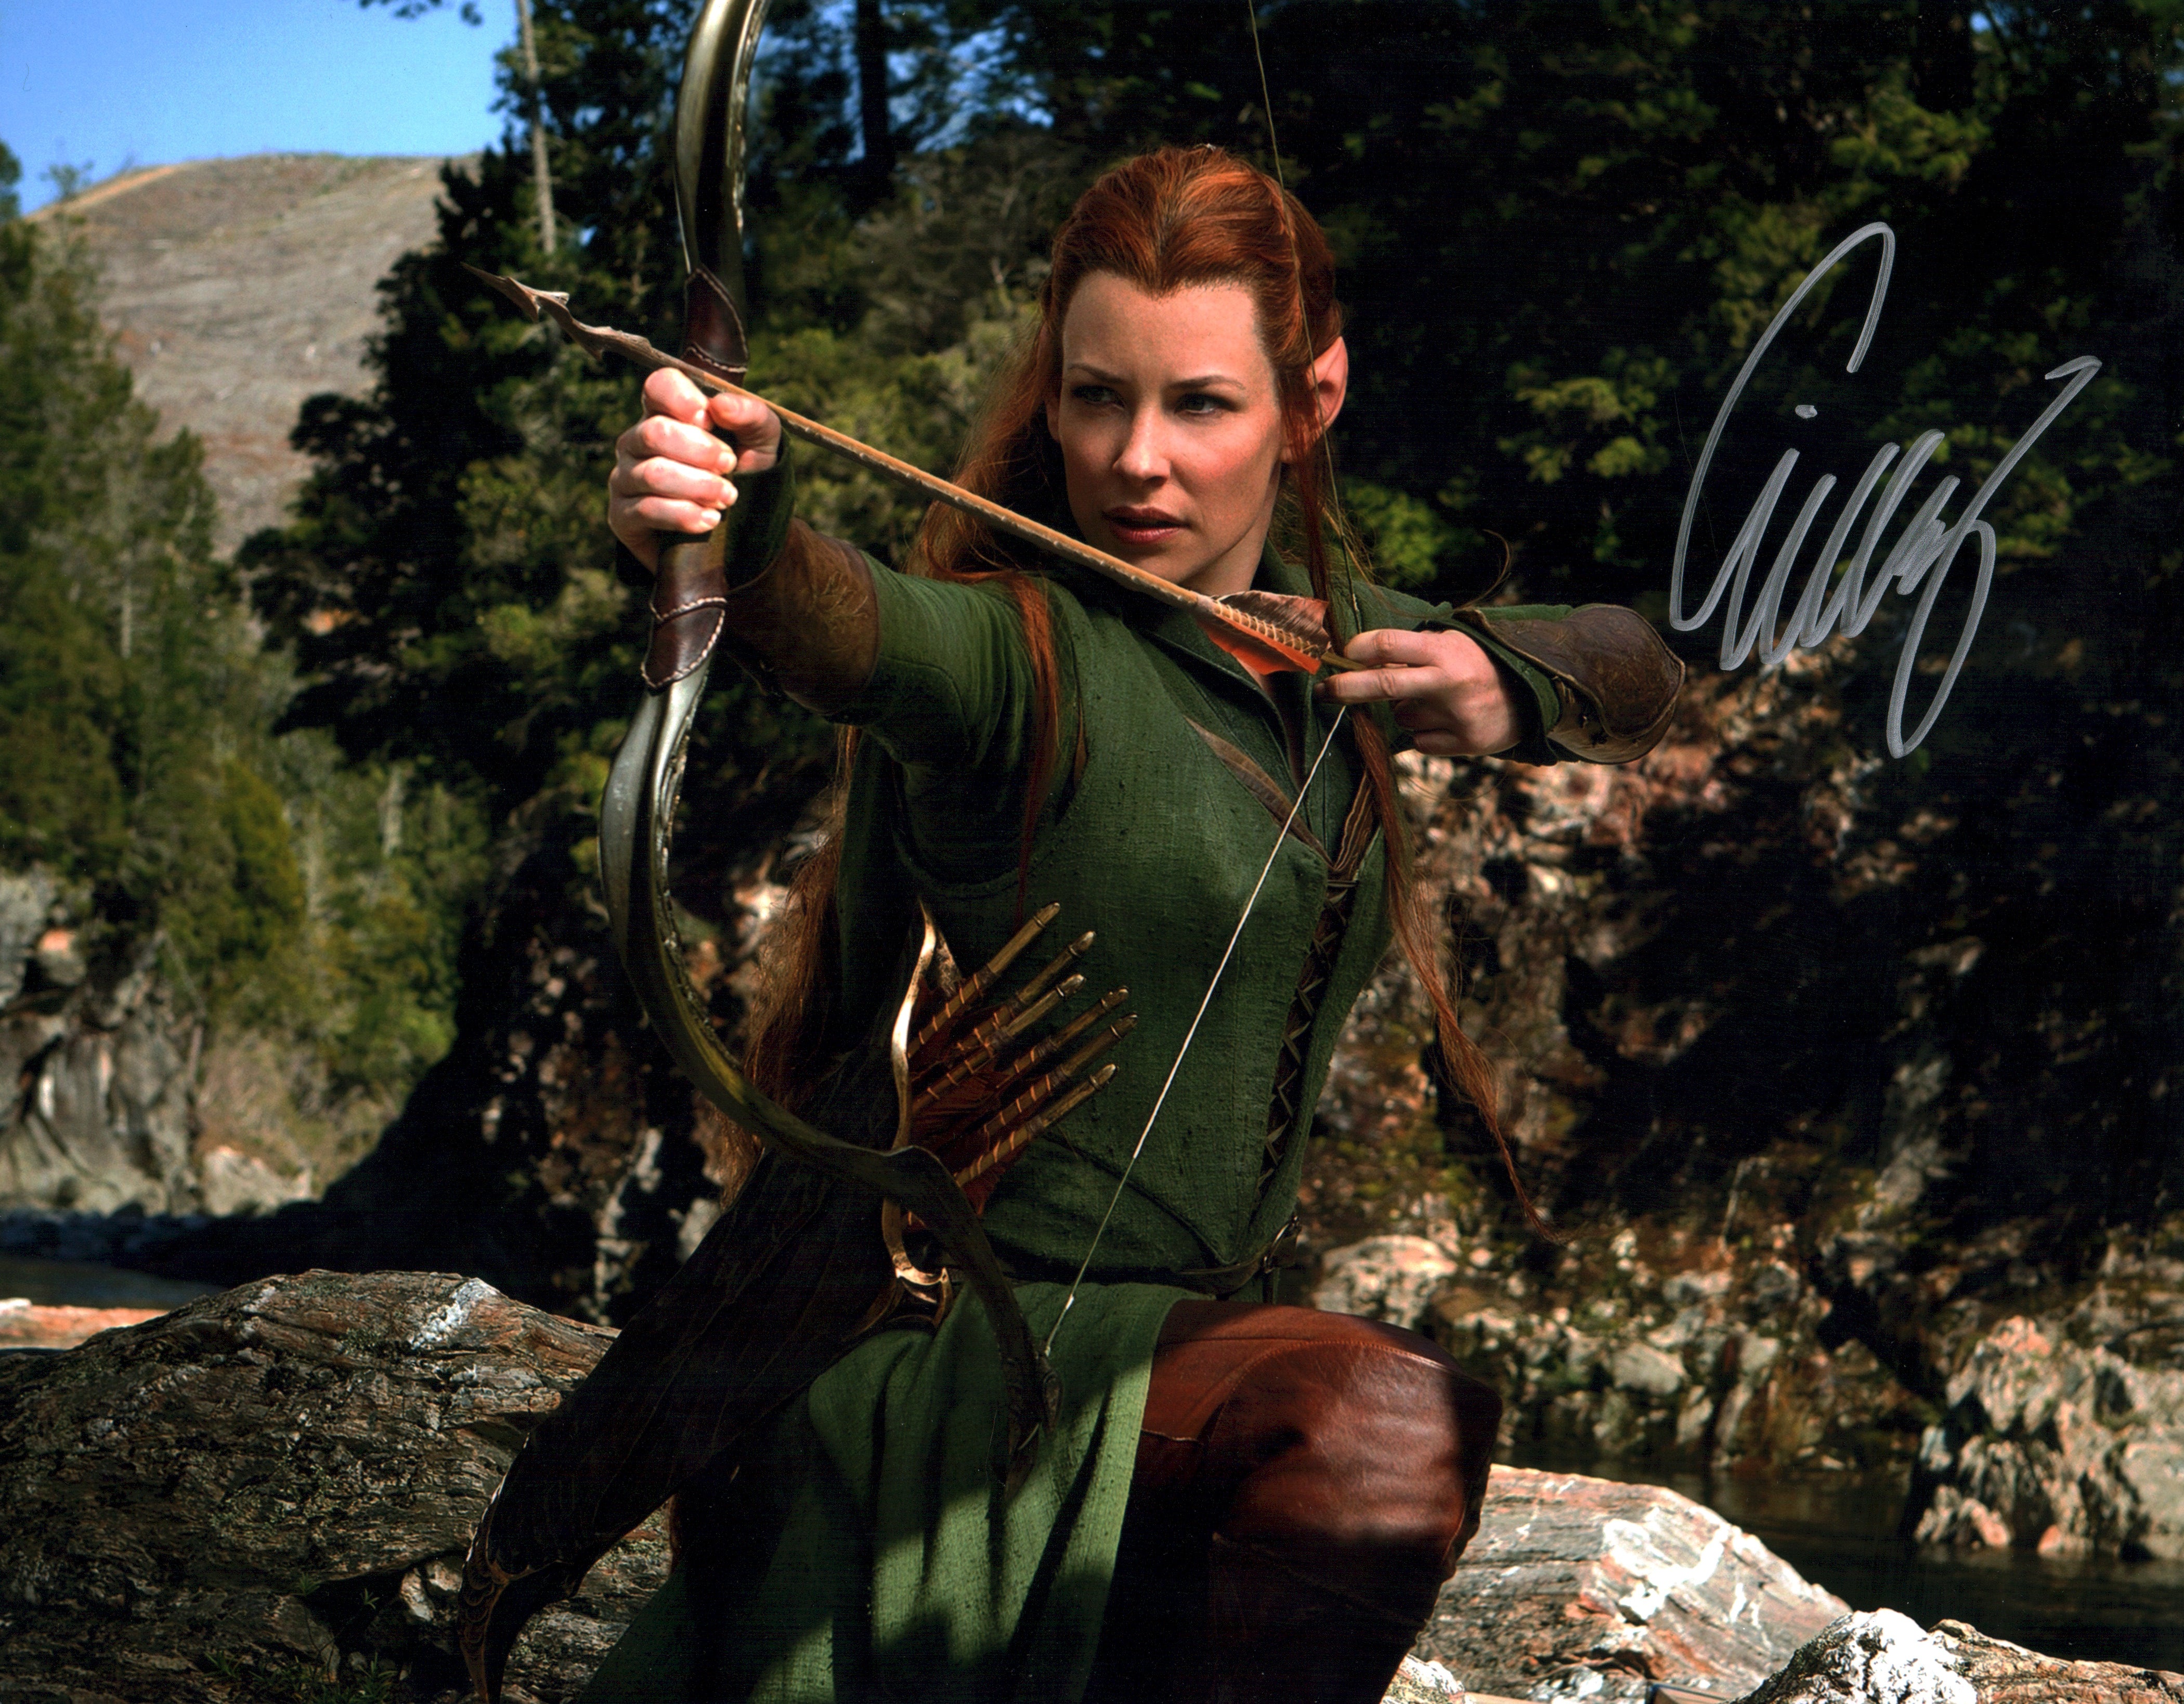 Evangeline Lilly The Hobbit 11x14 Signed Photo Poster JSA Certified Autograph